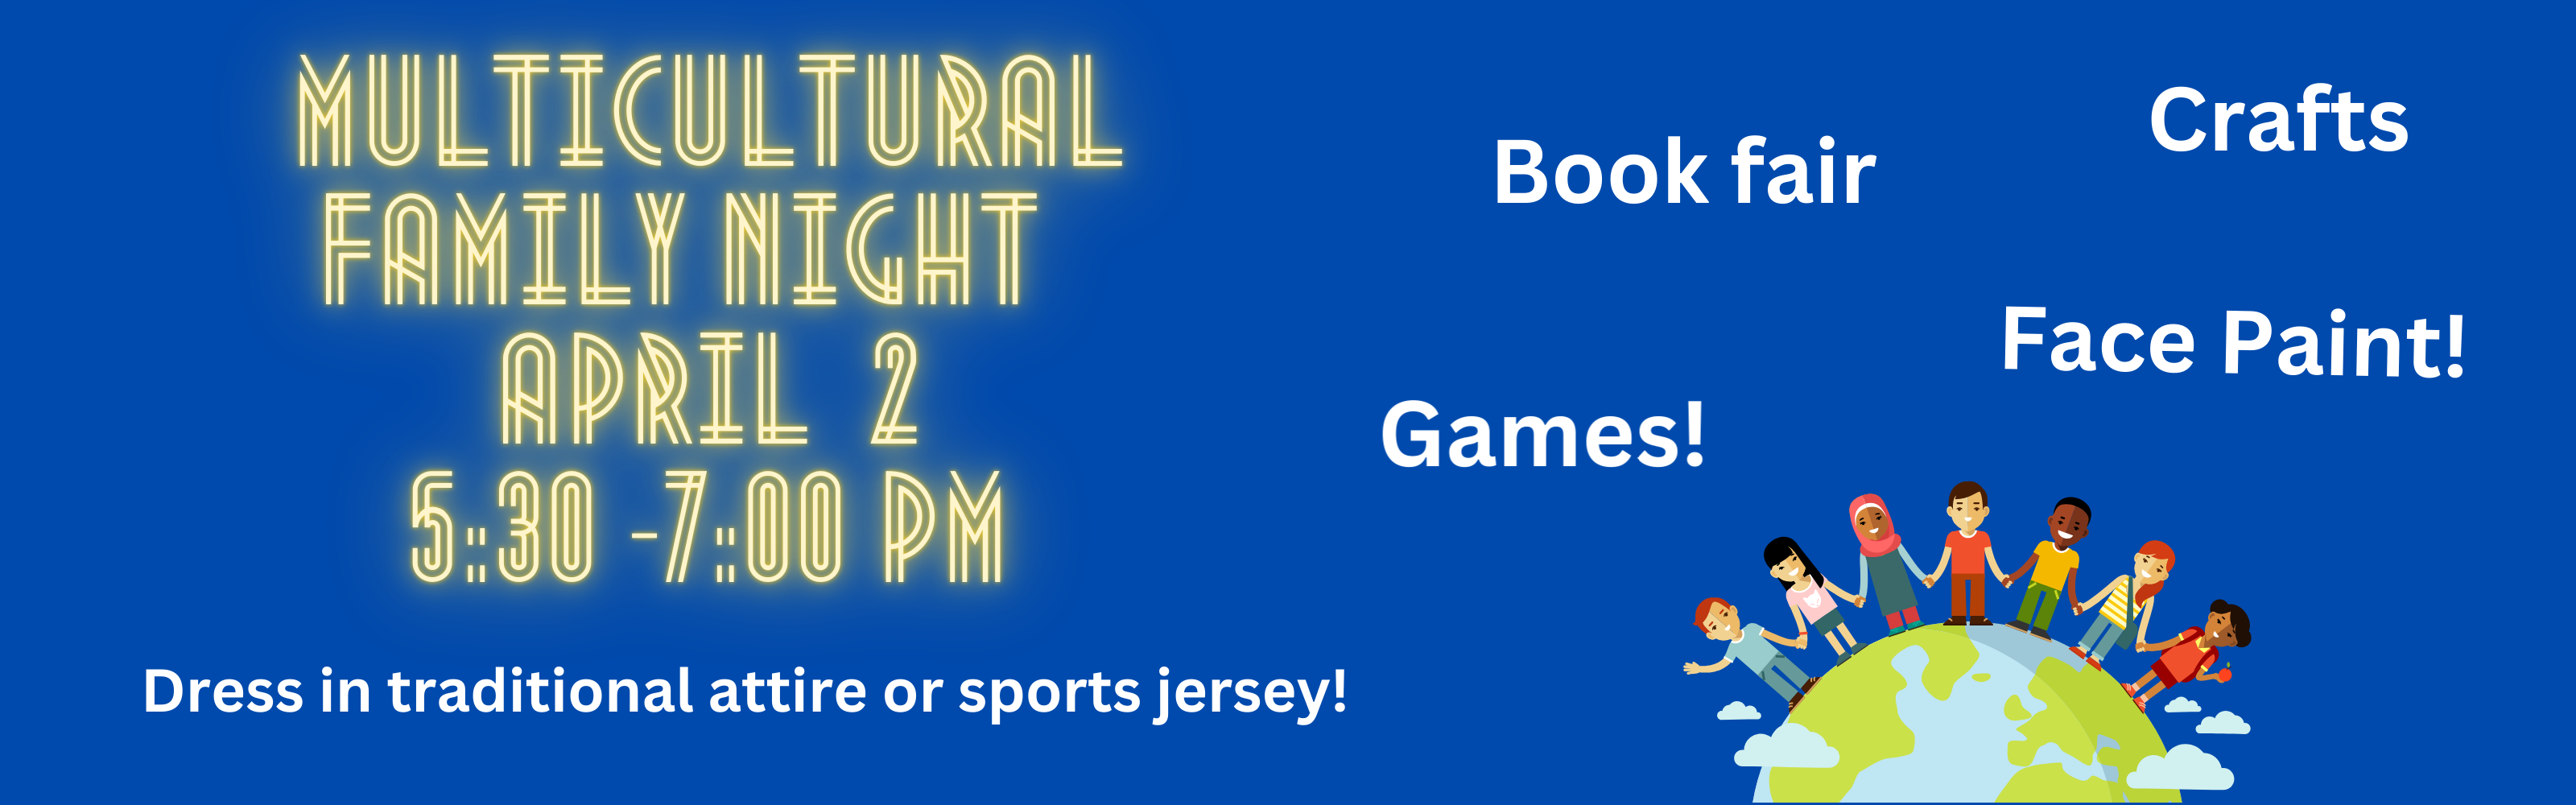 Multicultural Night April 2nd from 5:30 to 7:00, boo fair, crafts, games and face painting. Dress in traditional attire or sports jersey